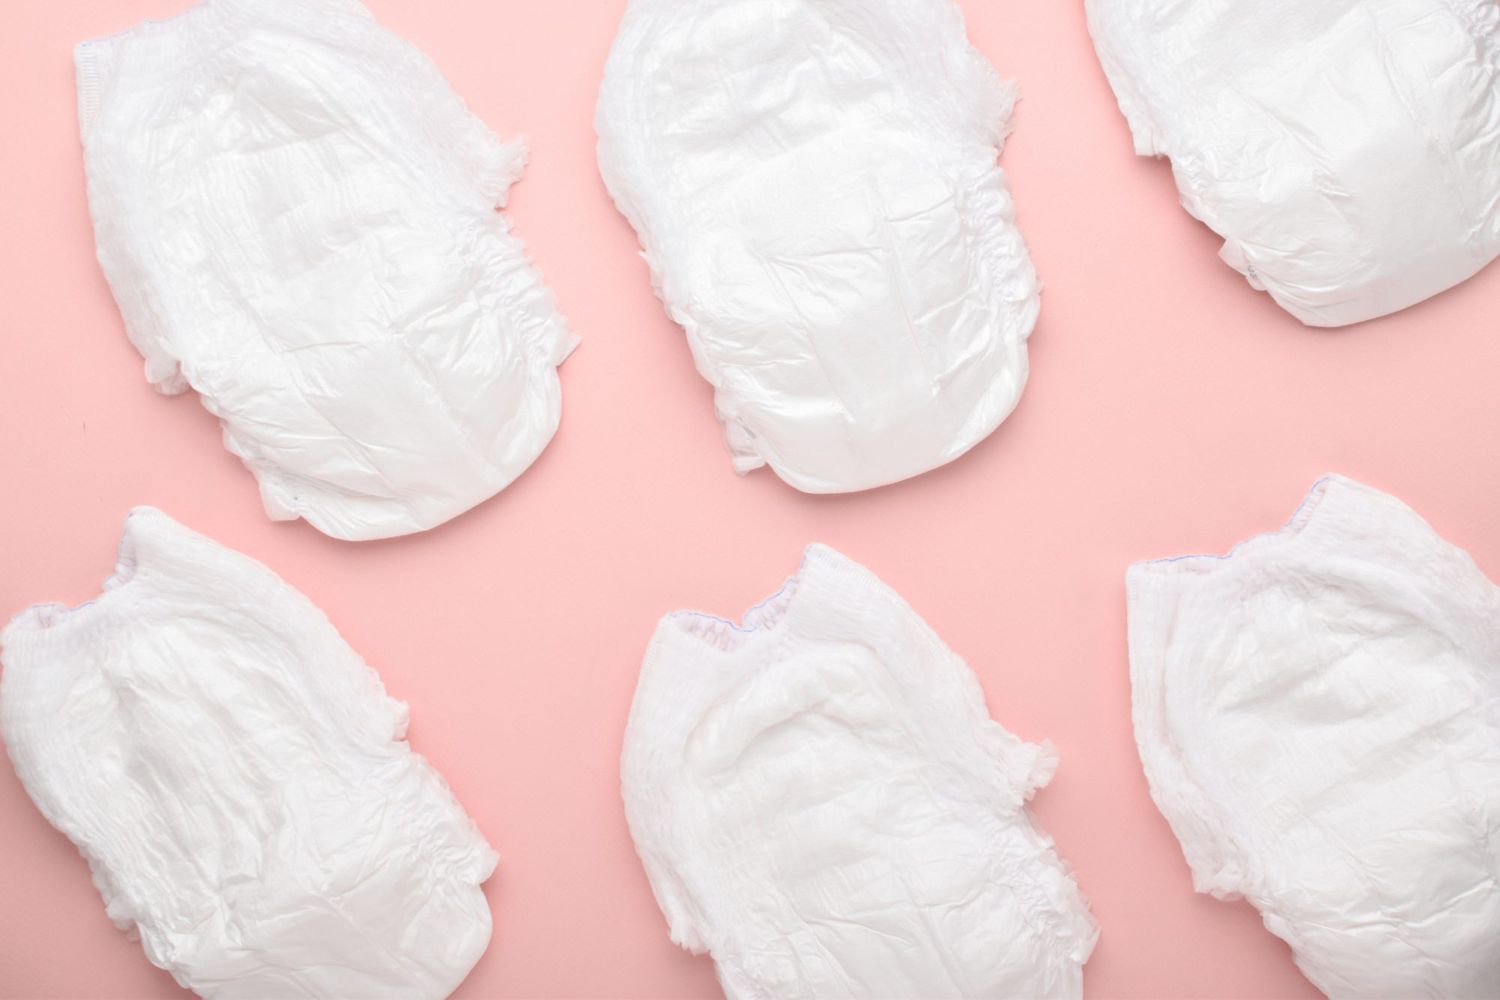 An image of diapers on a pink background.